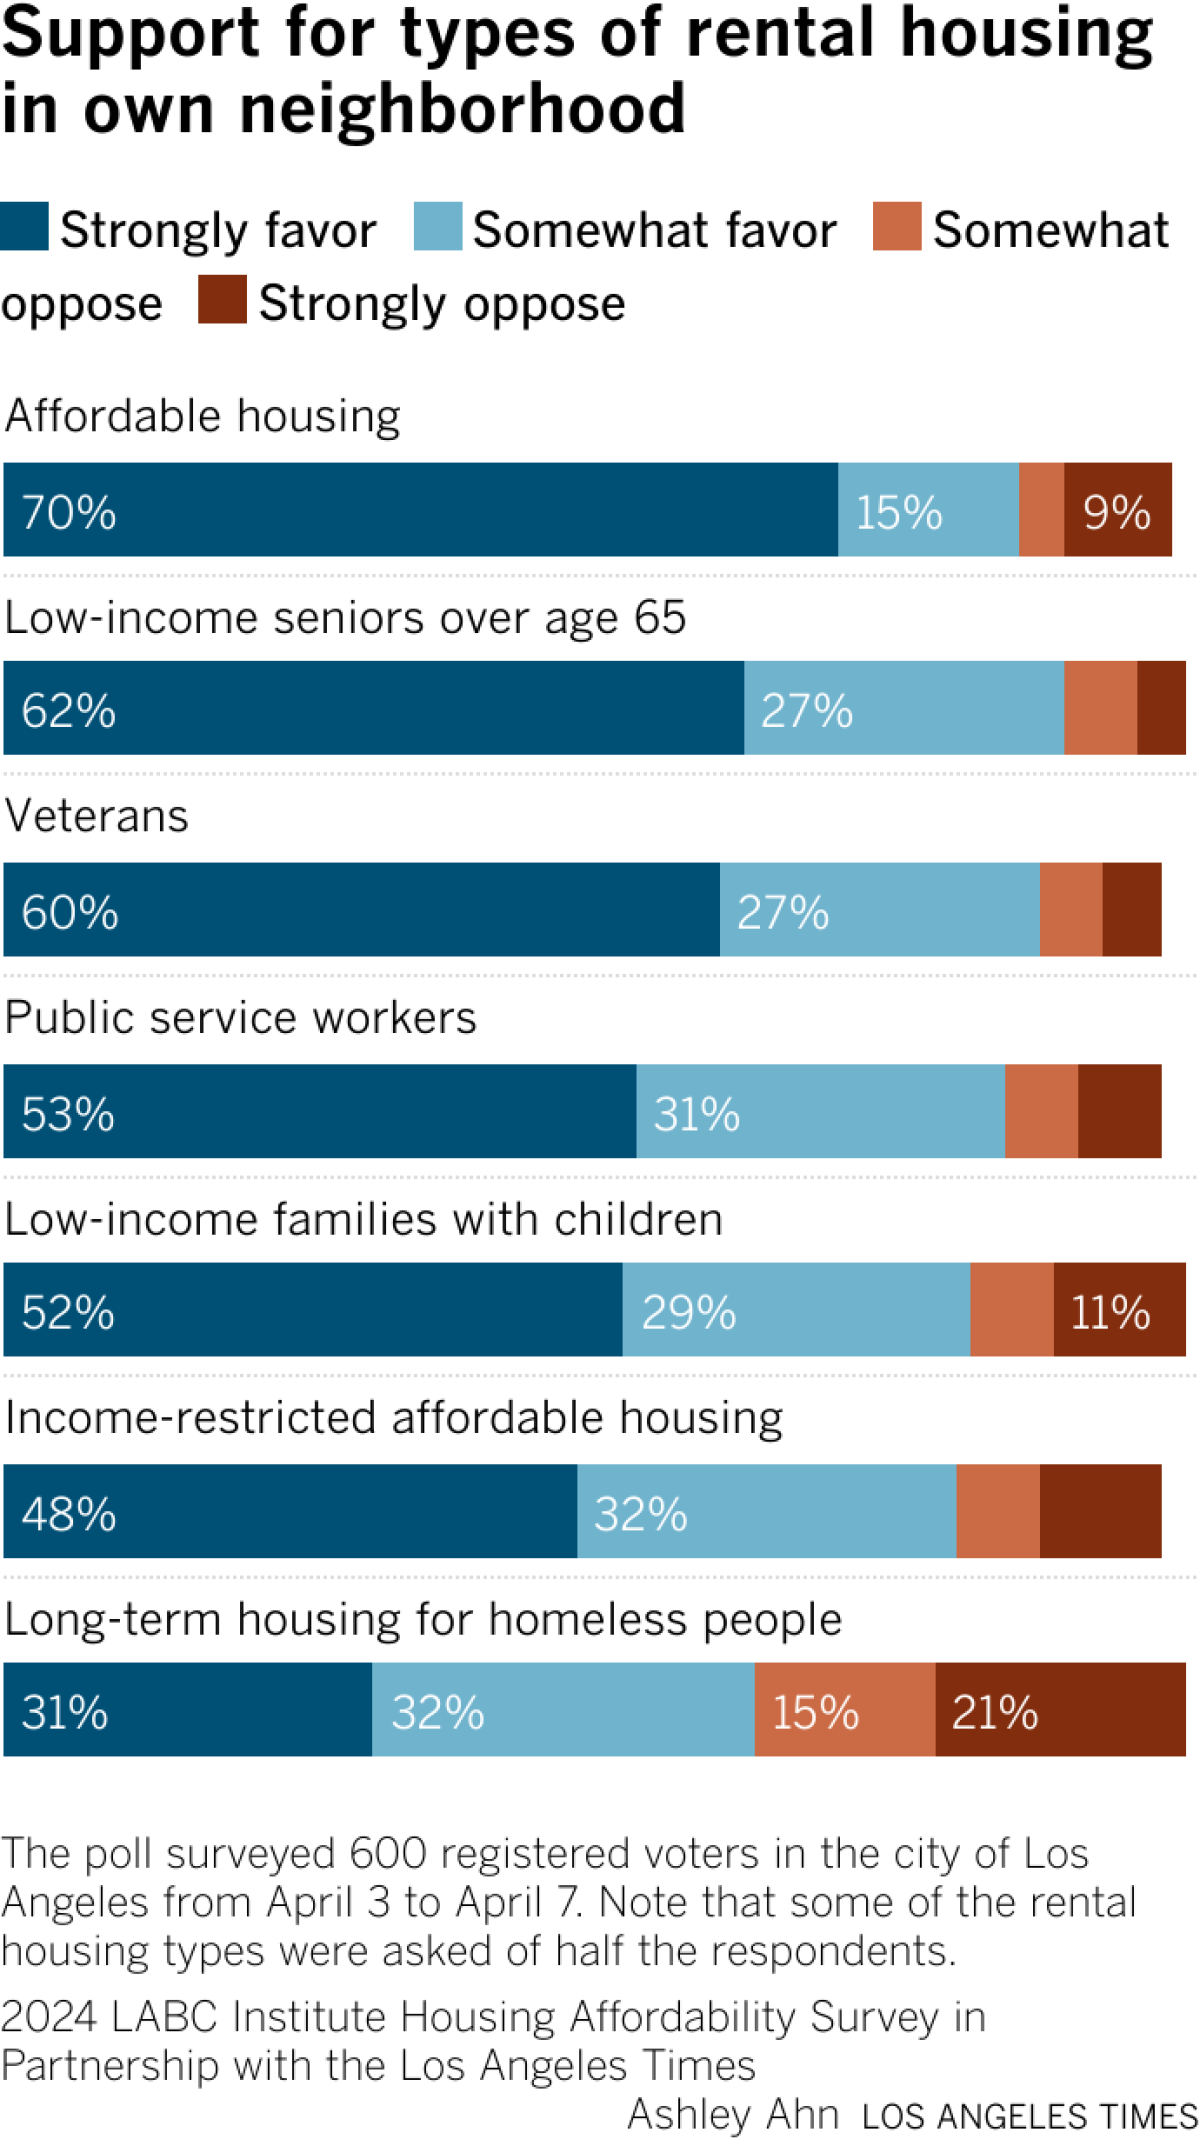 Support for types of rental housing in own neighborhood